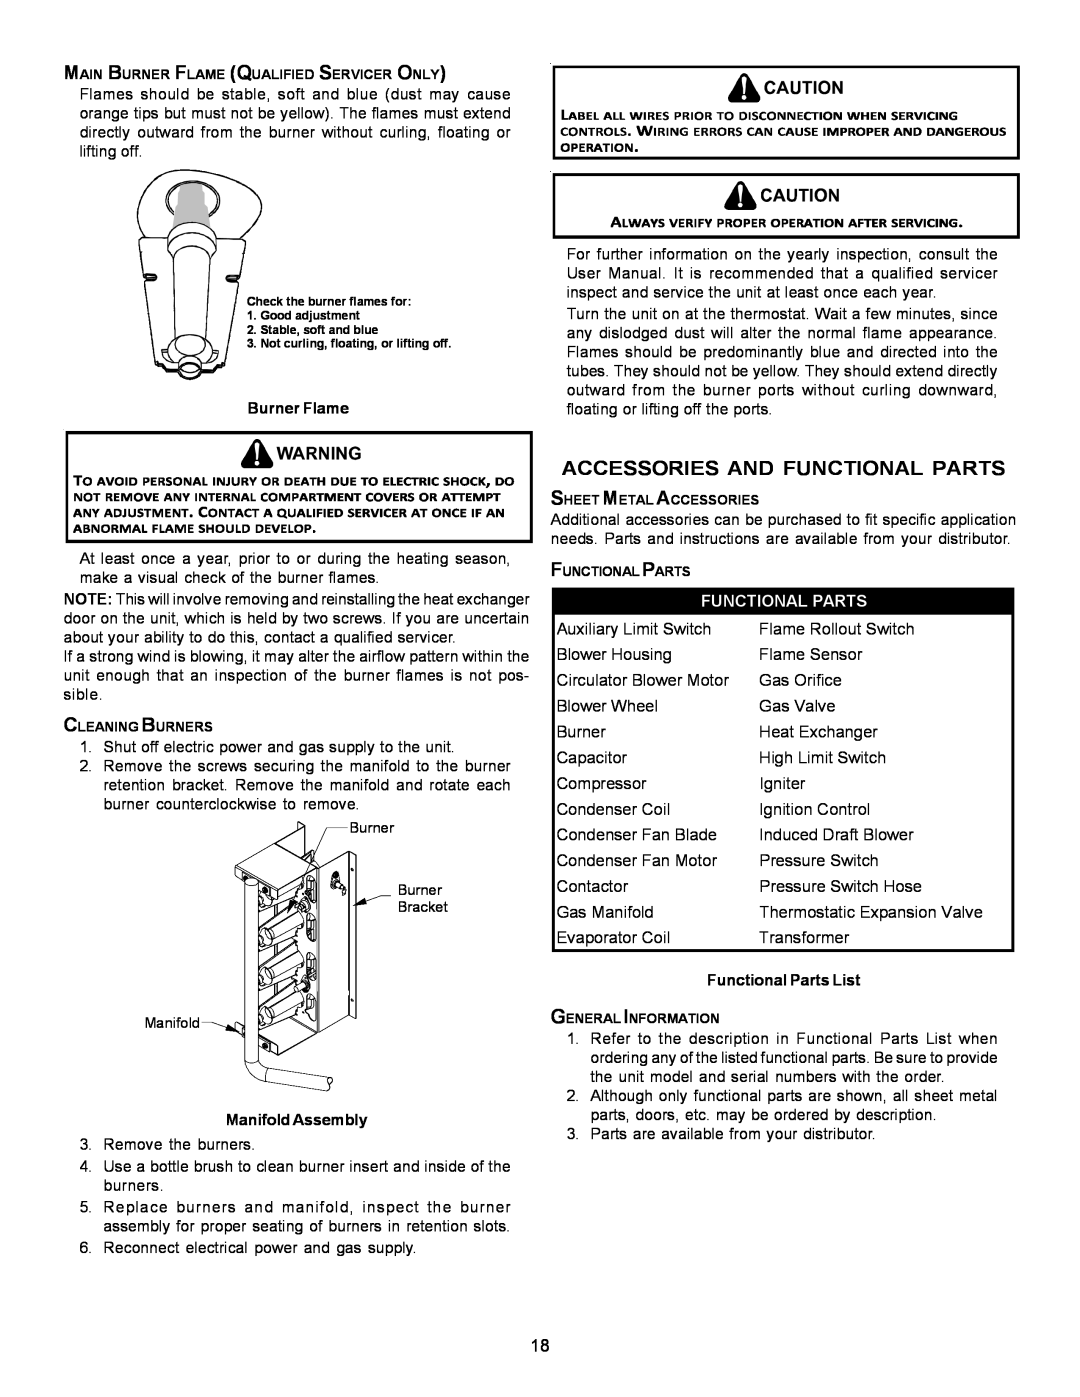 Goodman Mfg PG 15 specifications Accessories And Functional Parts, Burner Flame, Manifold Assembly, Functional Parts List 